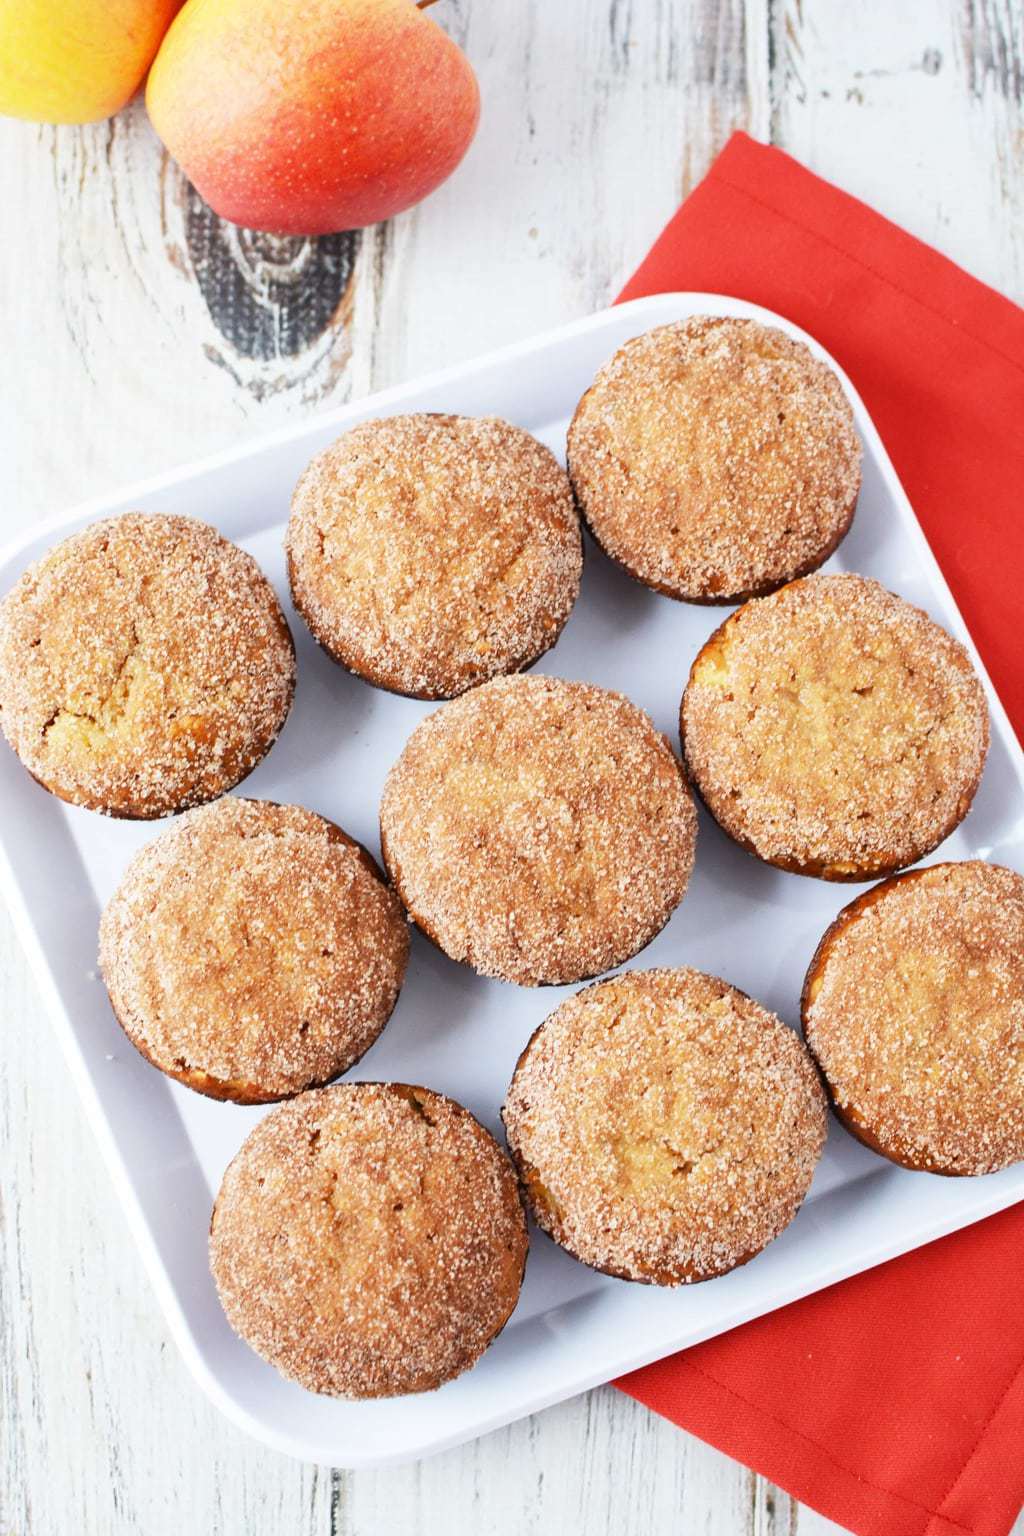 Not only are these Apple Cinnamon Oat Muffins moist and amazing, but there's nothing quite like sitting in my kitchen in the morning and eating one of this delicious treats for breakfast.